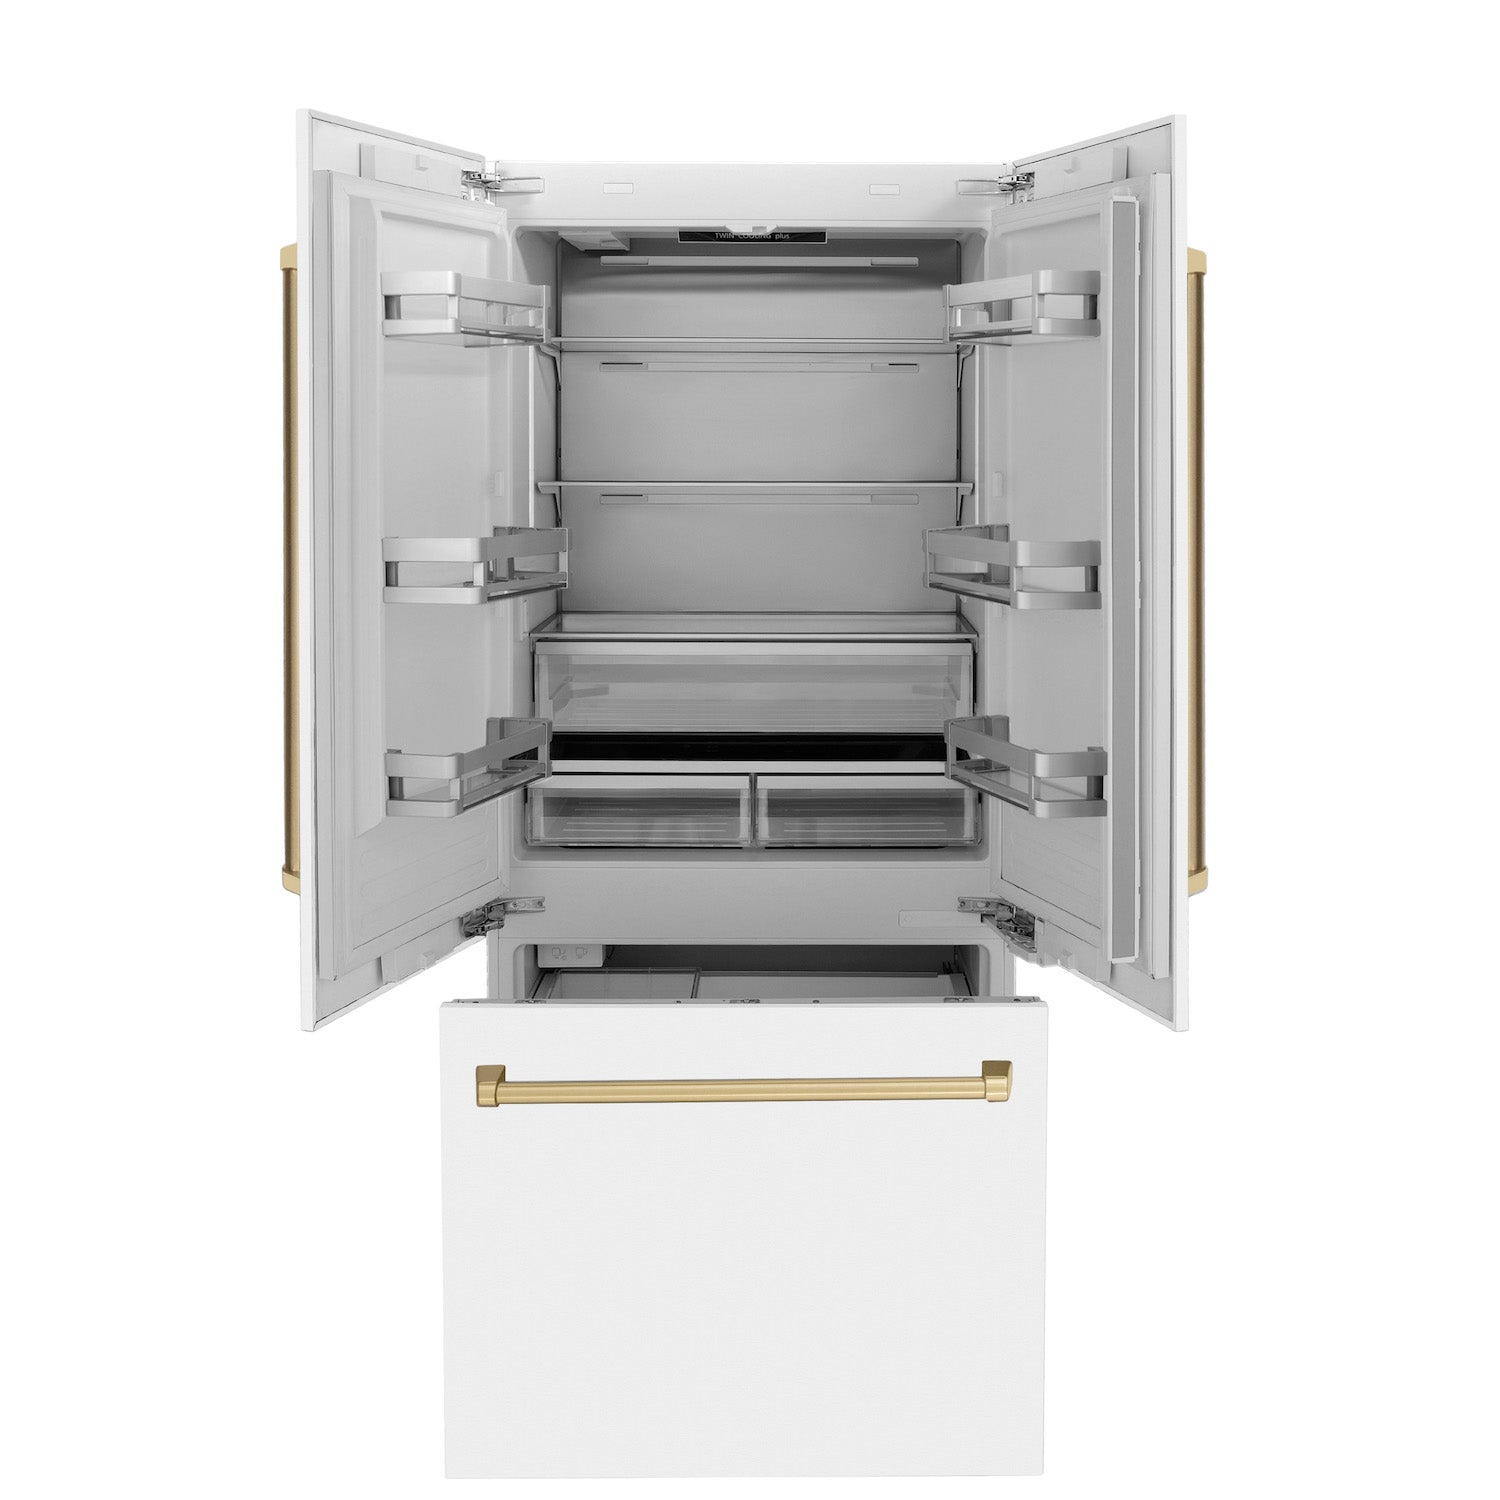 ZLINE Autograph Edition 36 in. Built-in Refrigerator in White Matte with Champagne Bronze Accents (RBIVZ-WM-36-CB) front, with doors and bottom freezer drawer open.